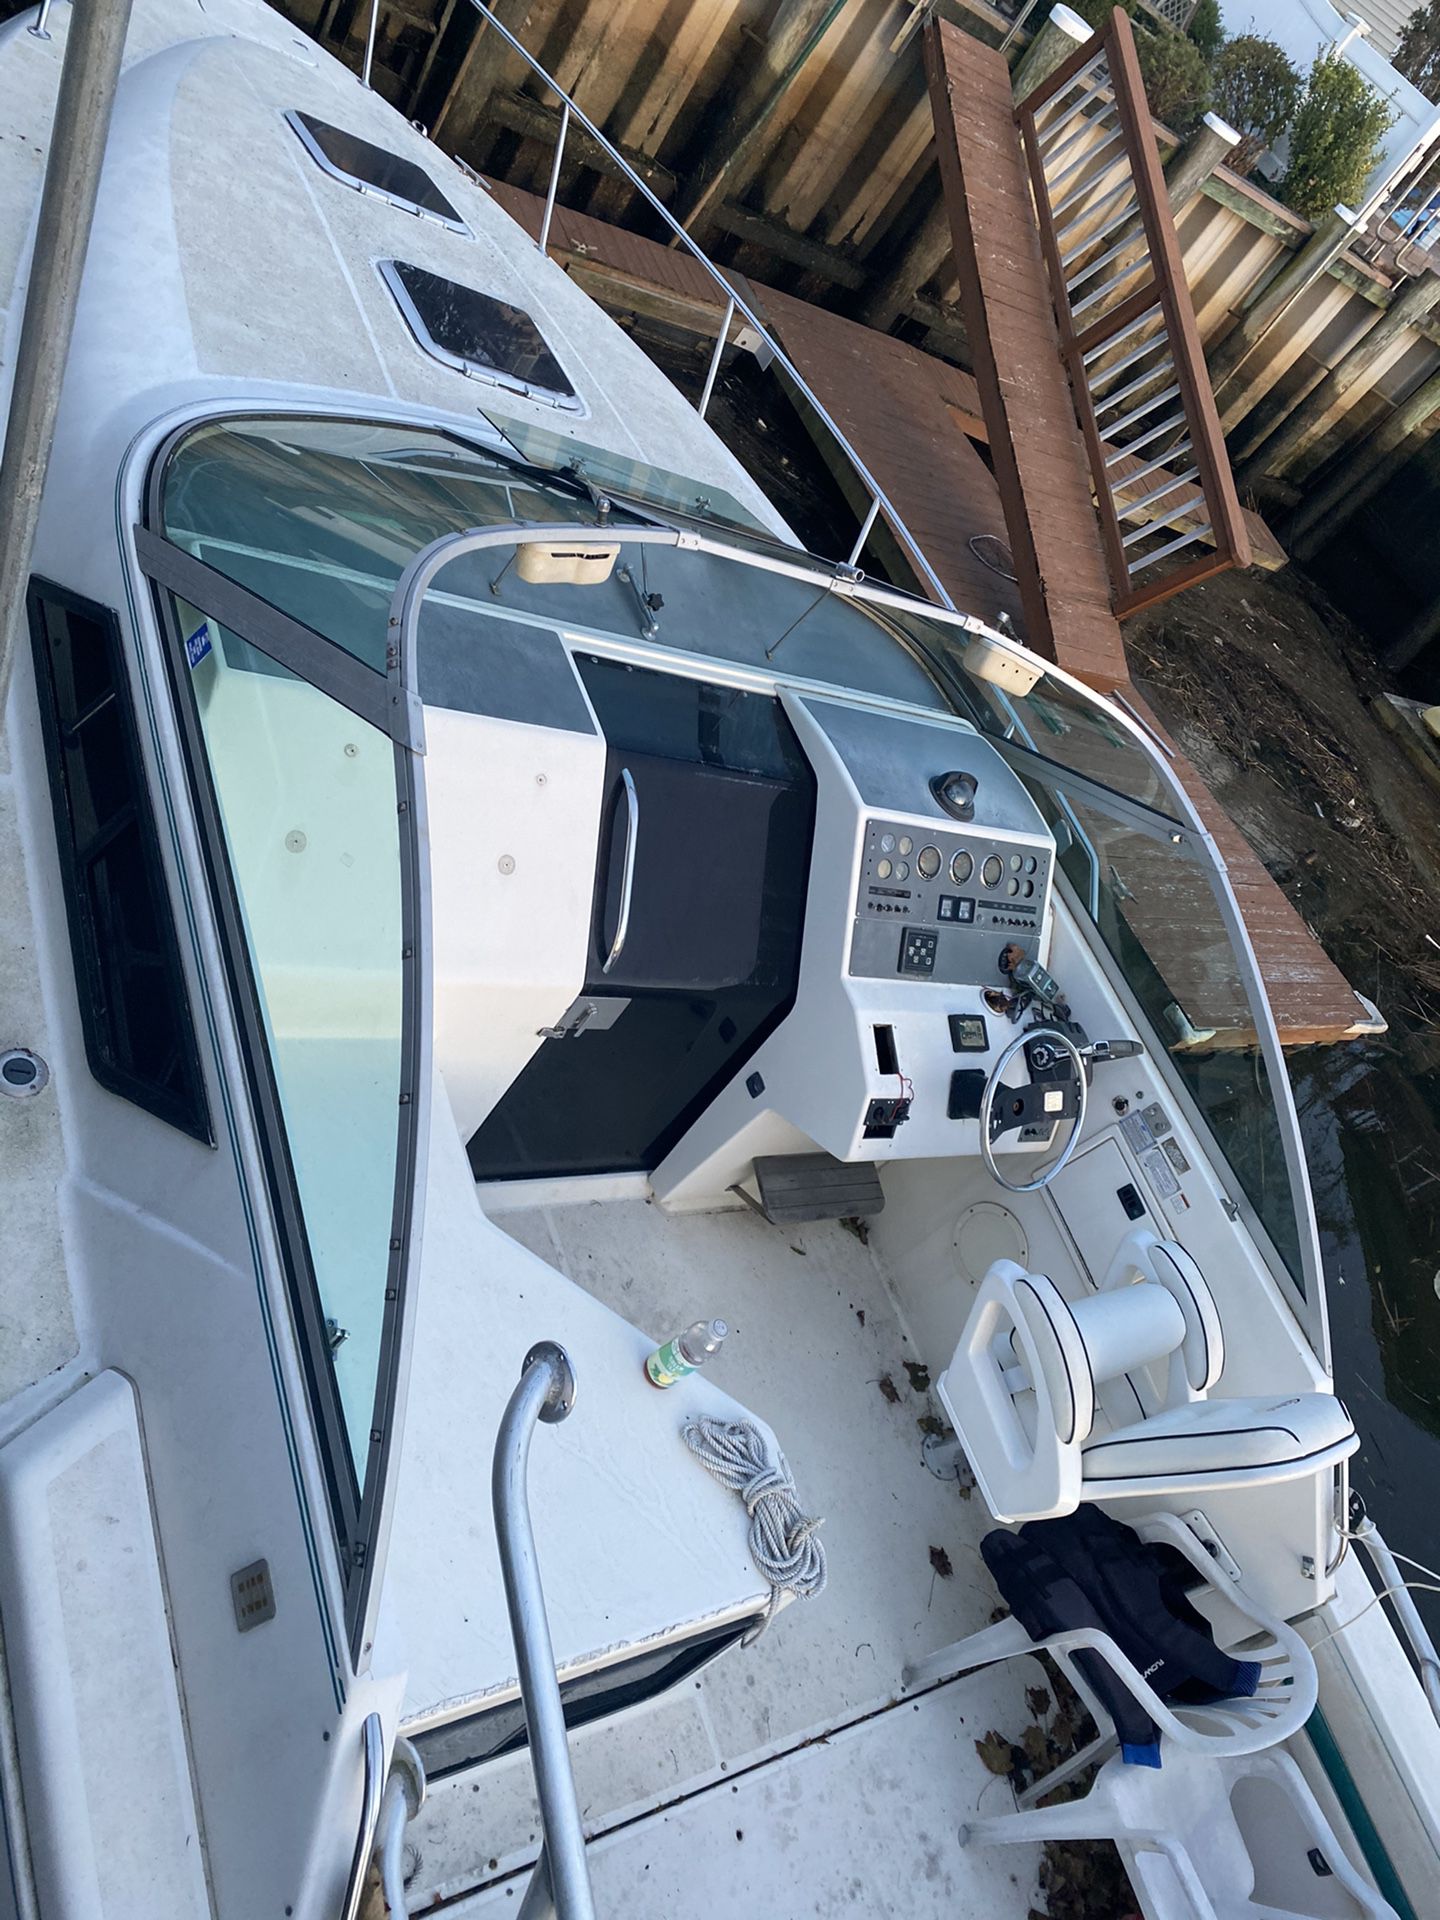 31 tiara Prices without Outboard motors With Outboard moters is a higher price t